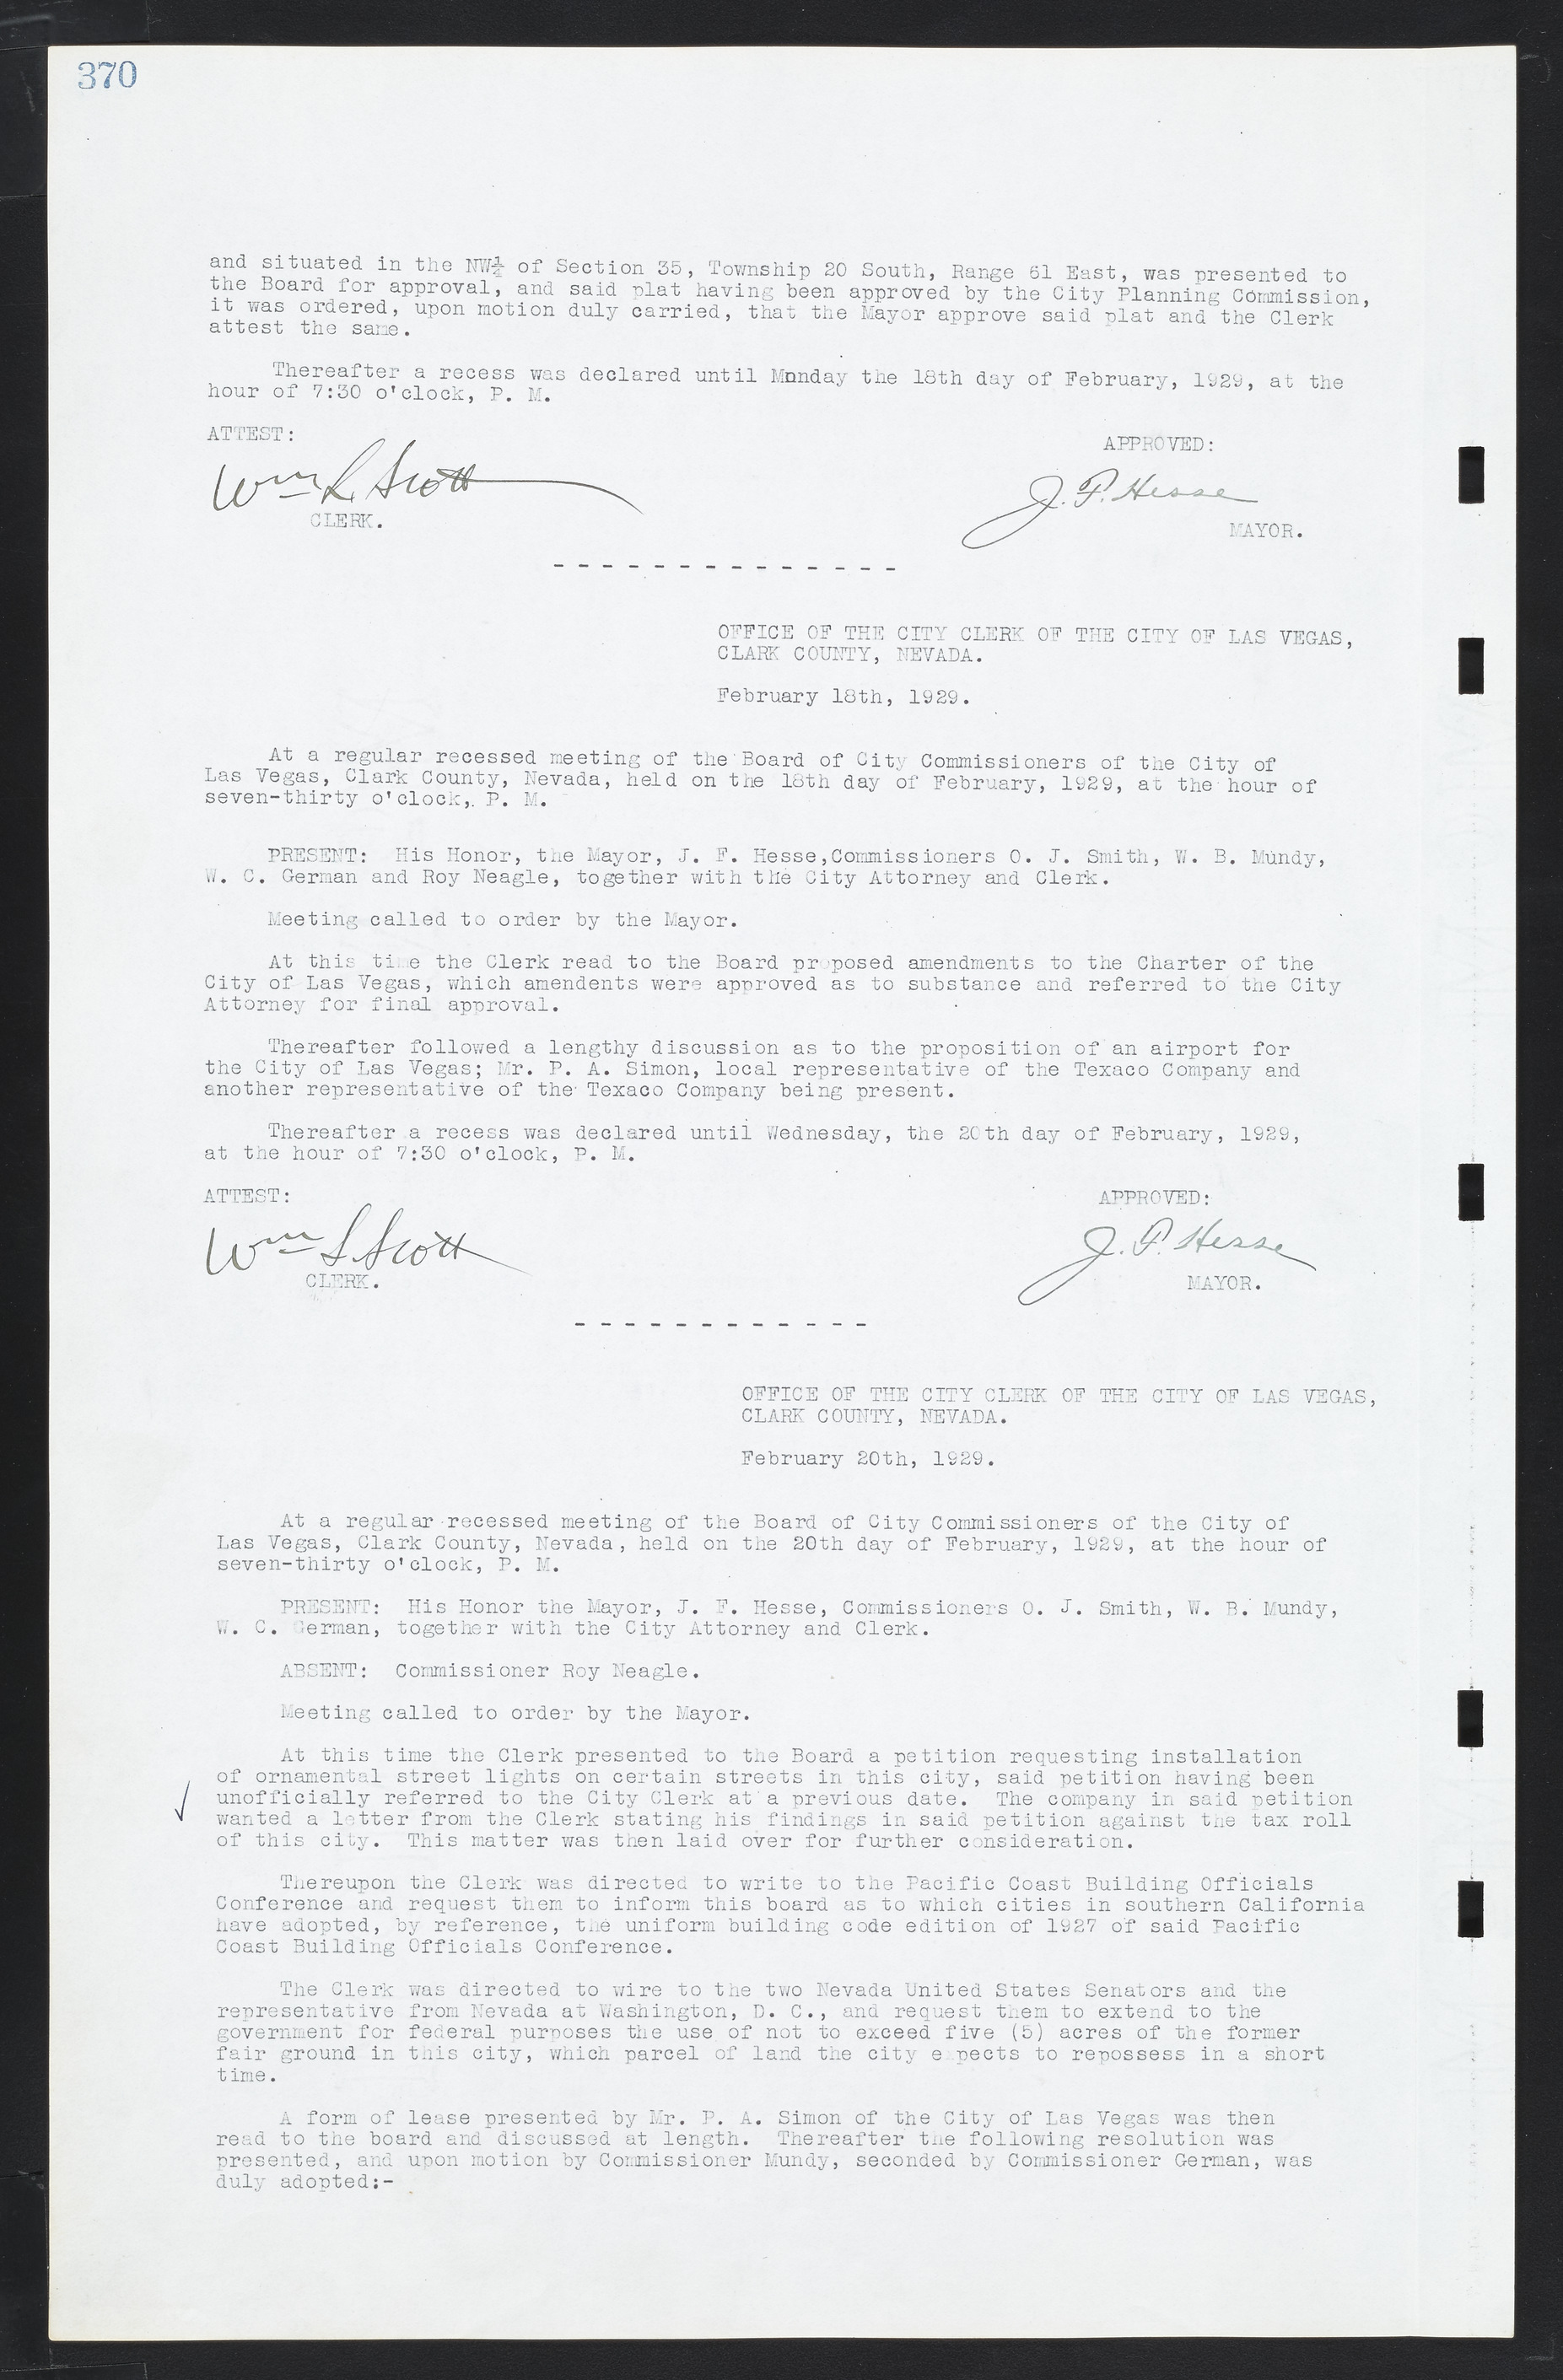 Las Vegas City Commission Minutes, March 1, 1922 to May 10, 1929, lvc000002-379